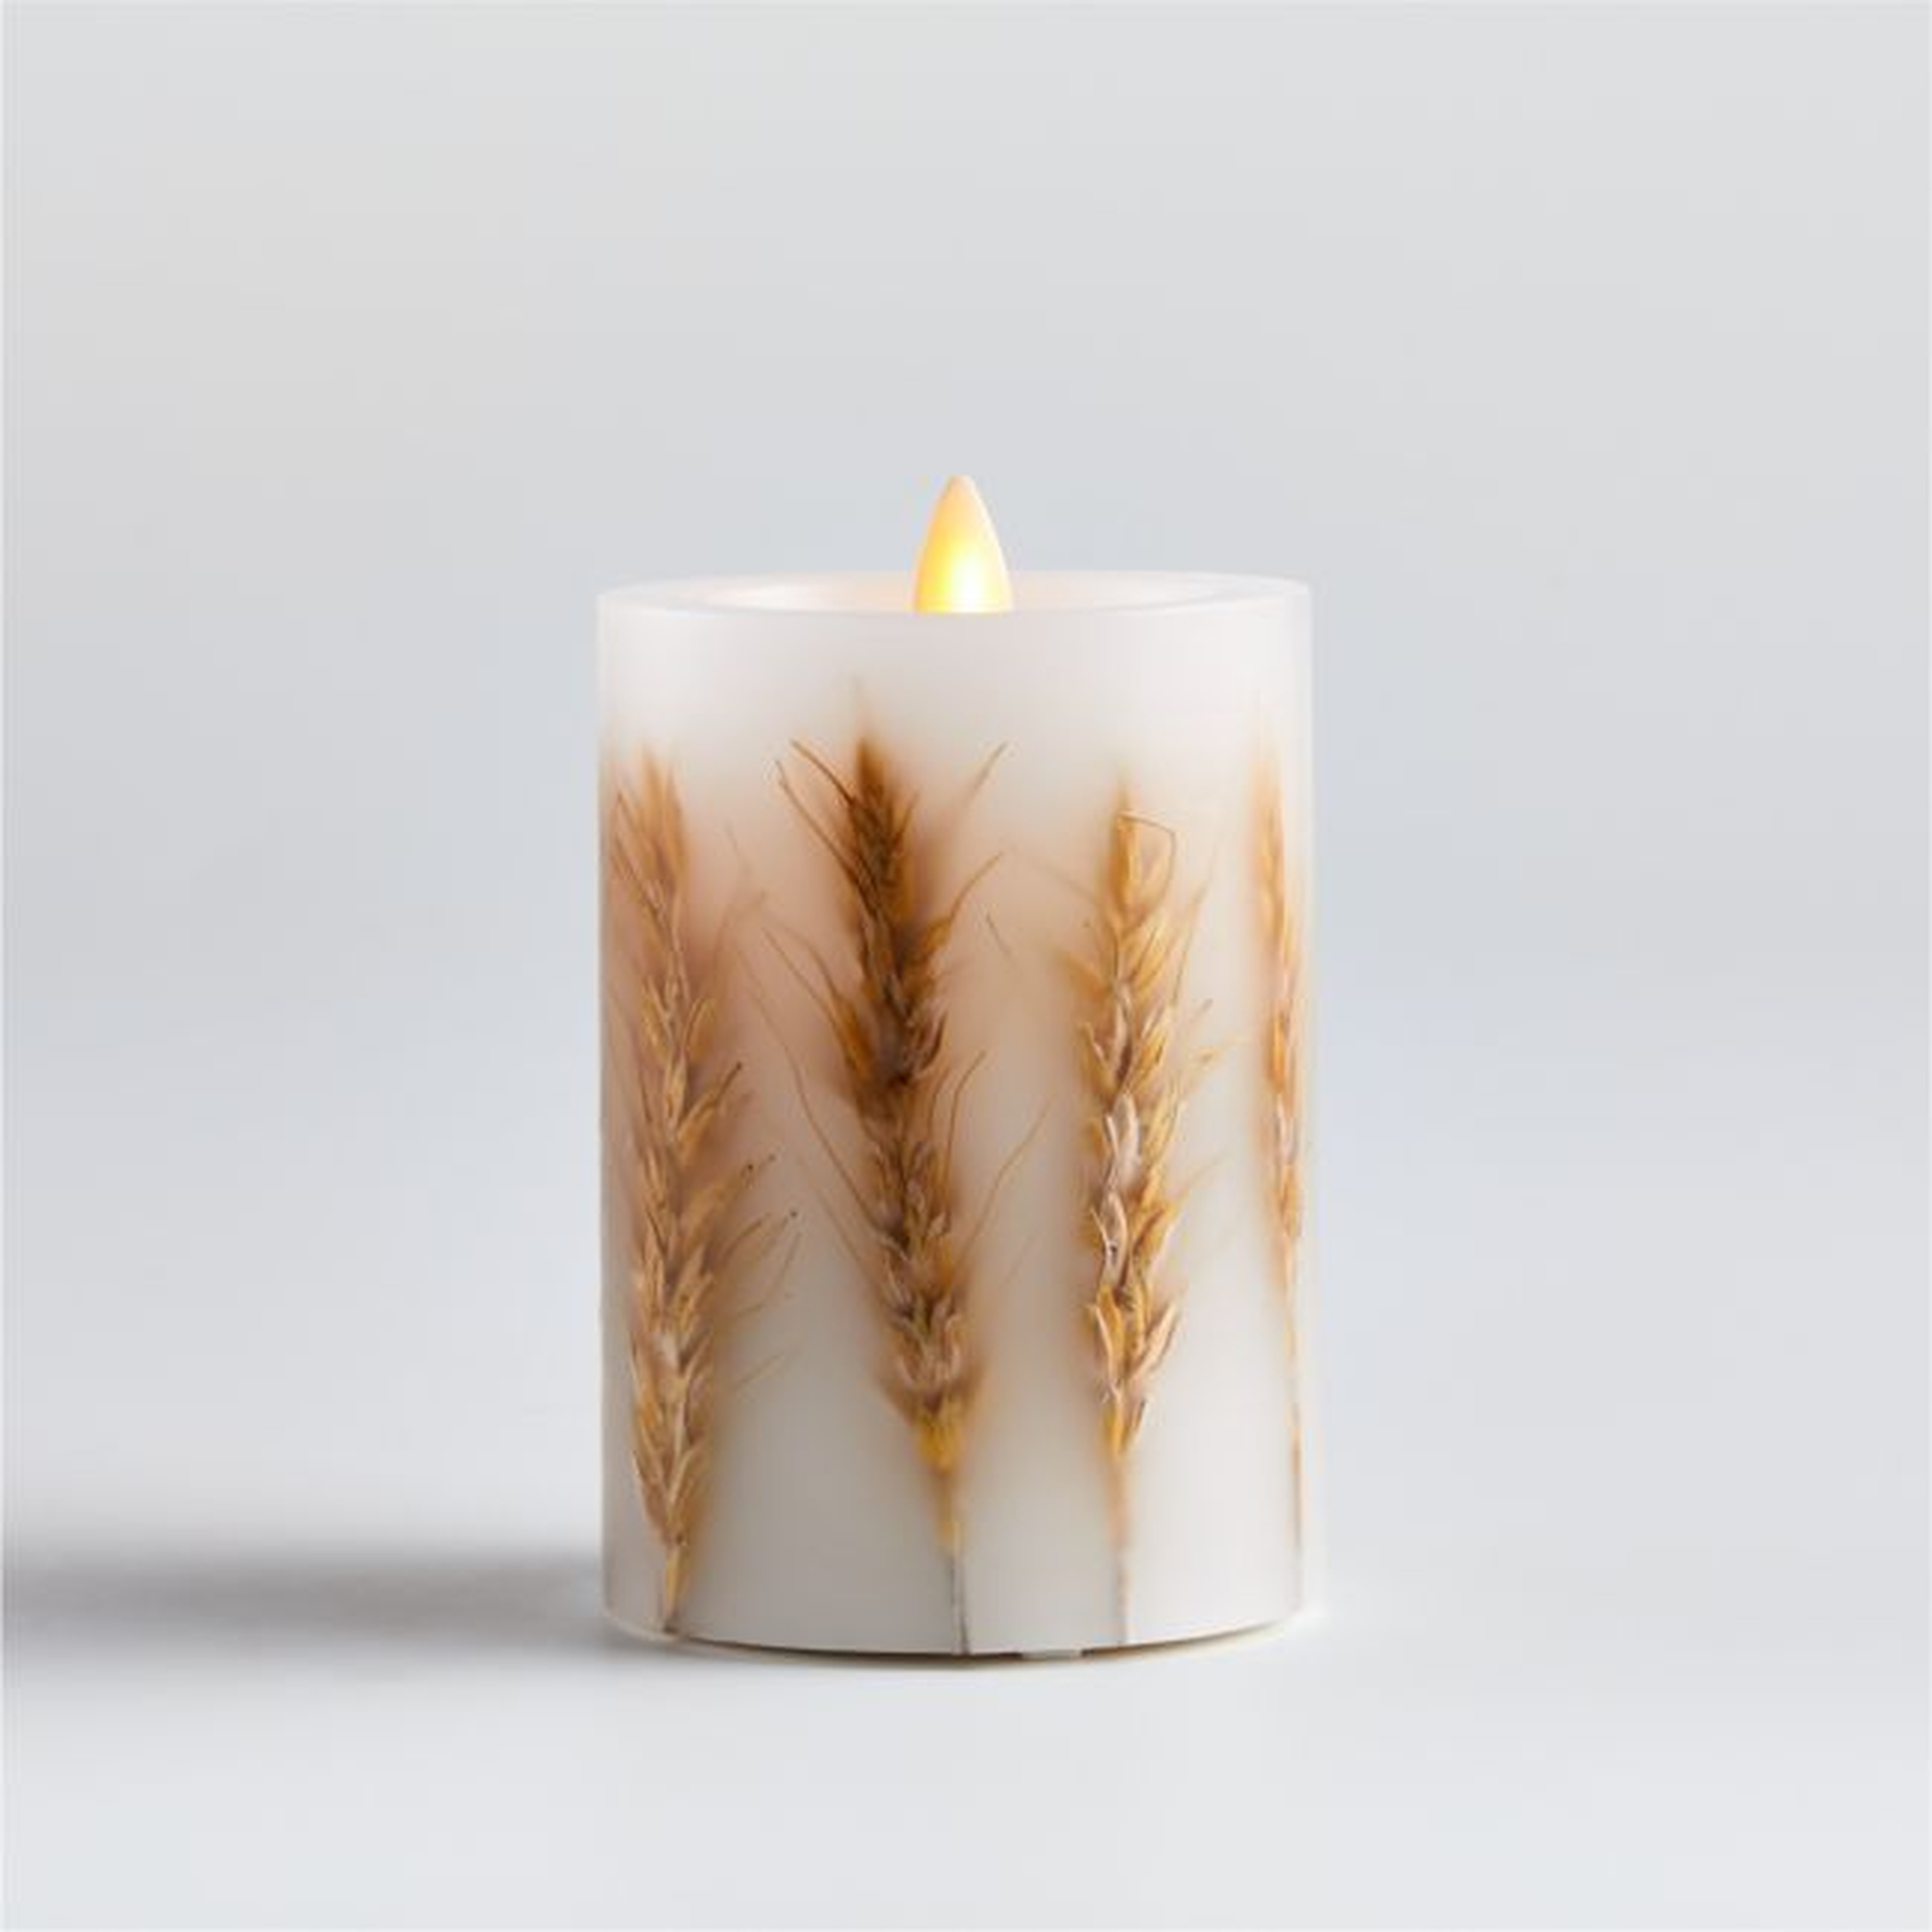 Flickering Flameless 3"x4" Wheat Inclusion Wax Pillar Candle. - Crate and Barrel